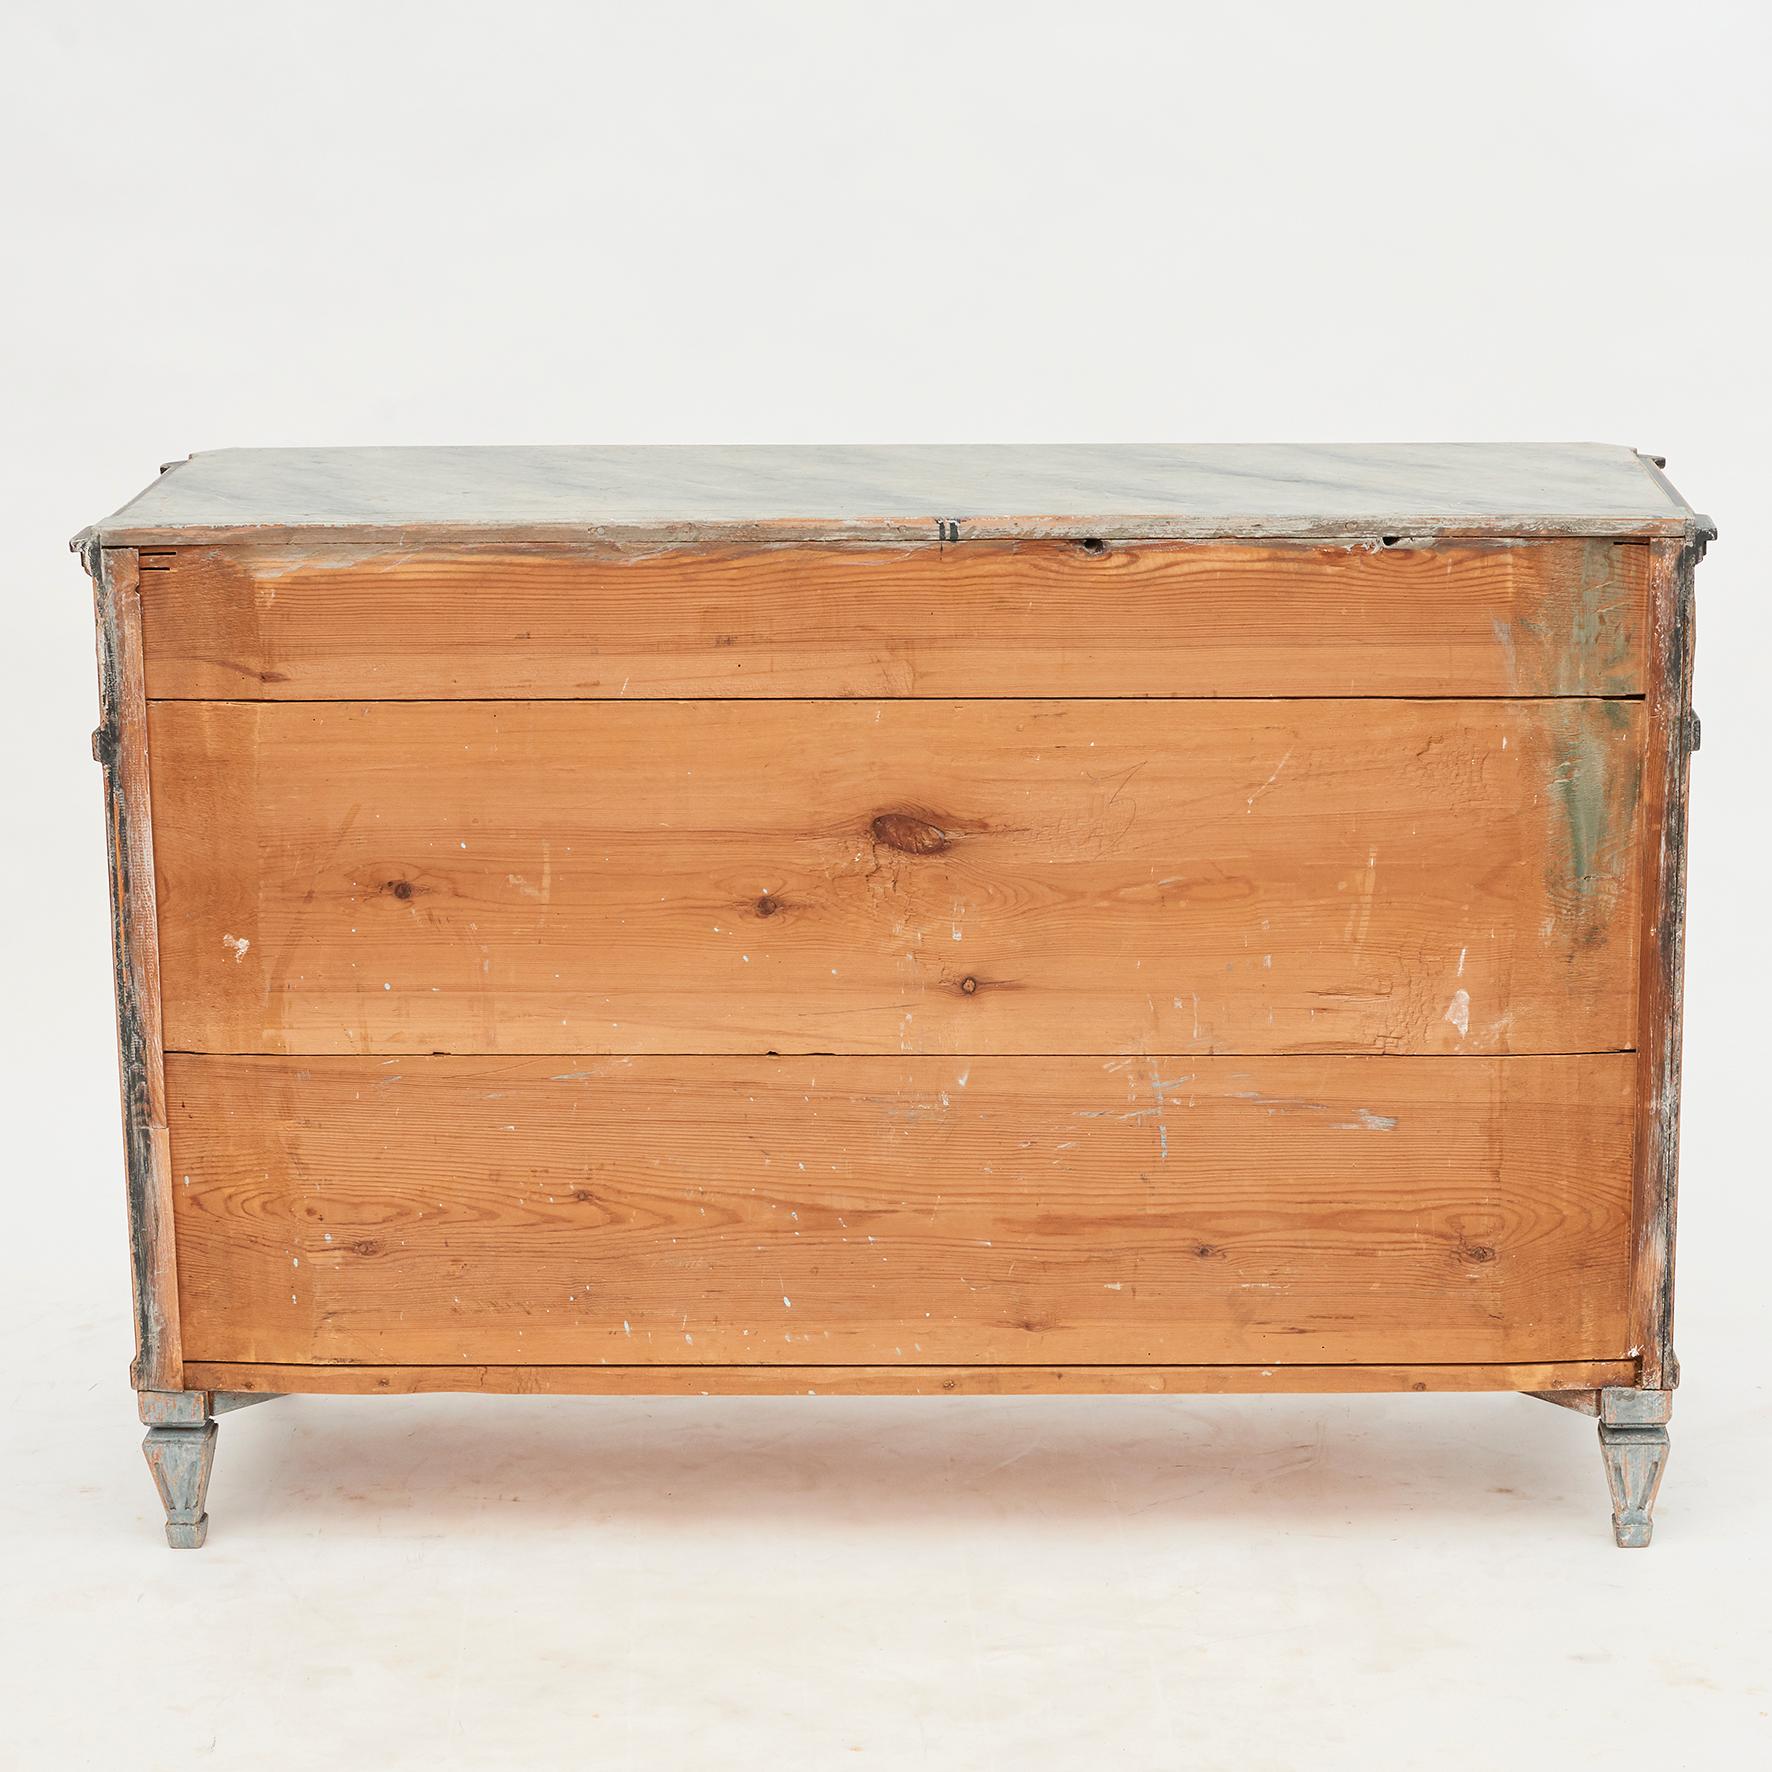 Pine Mid-19th Century Swedish Chest of drawers Gustavian Style Painted in Blue Shades